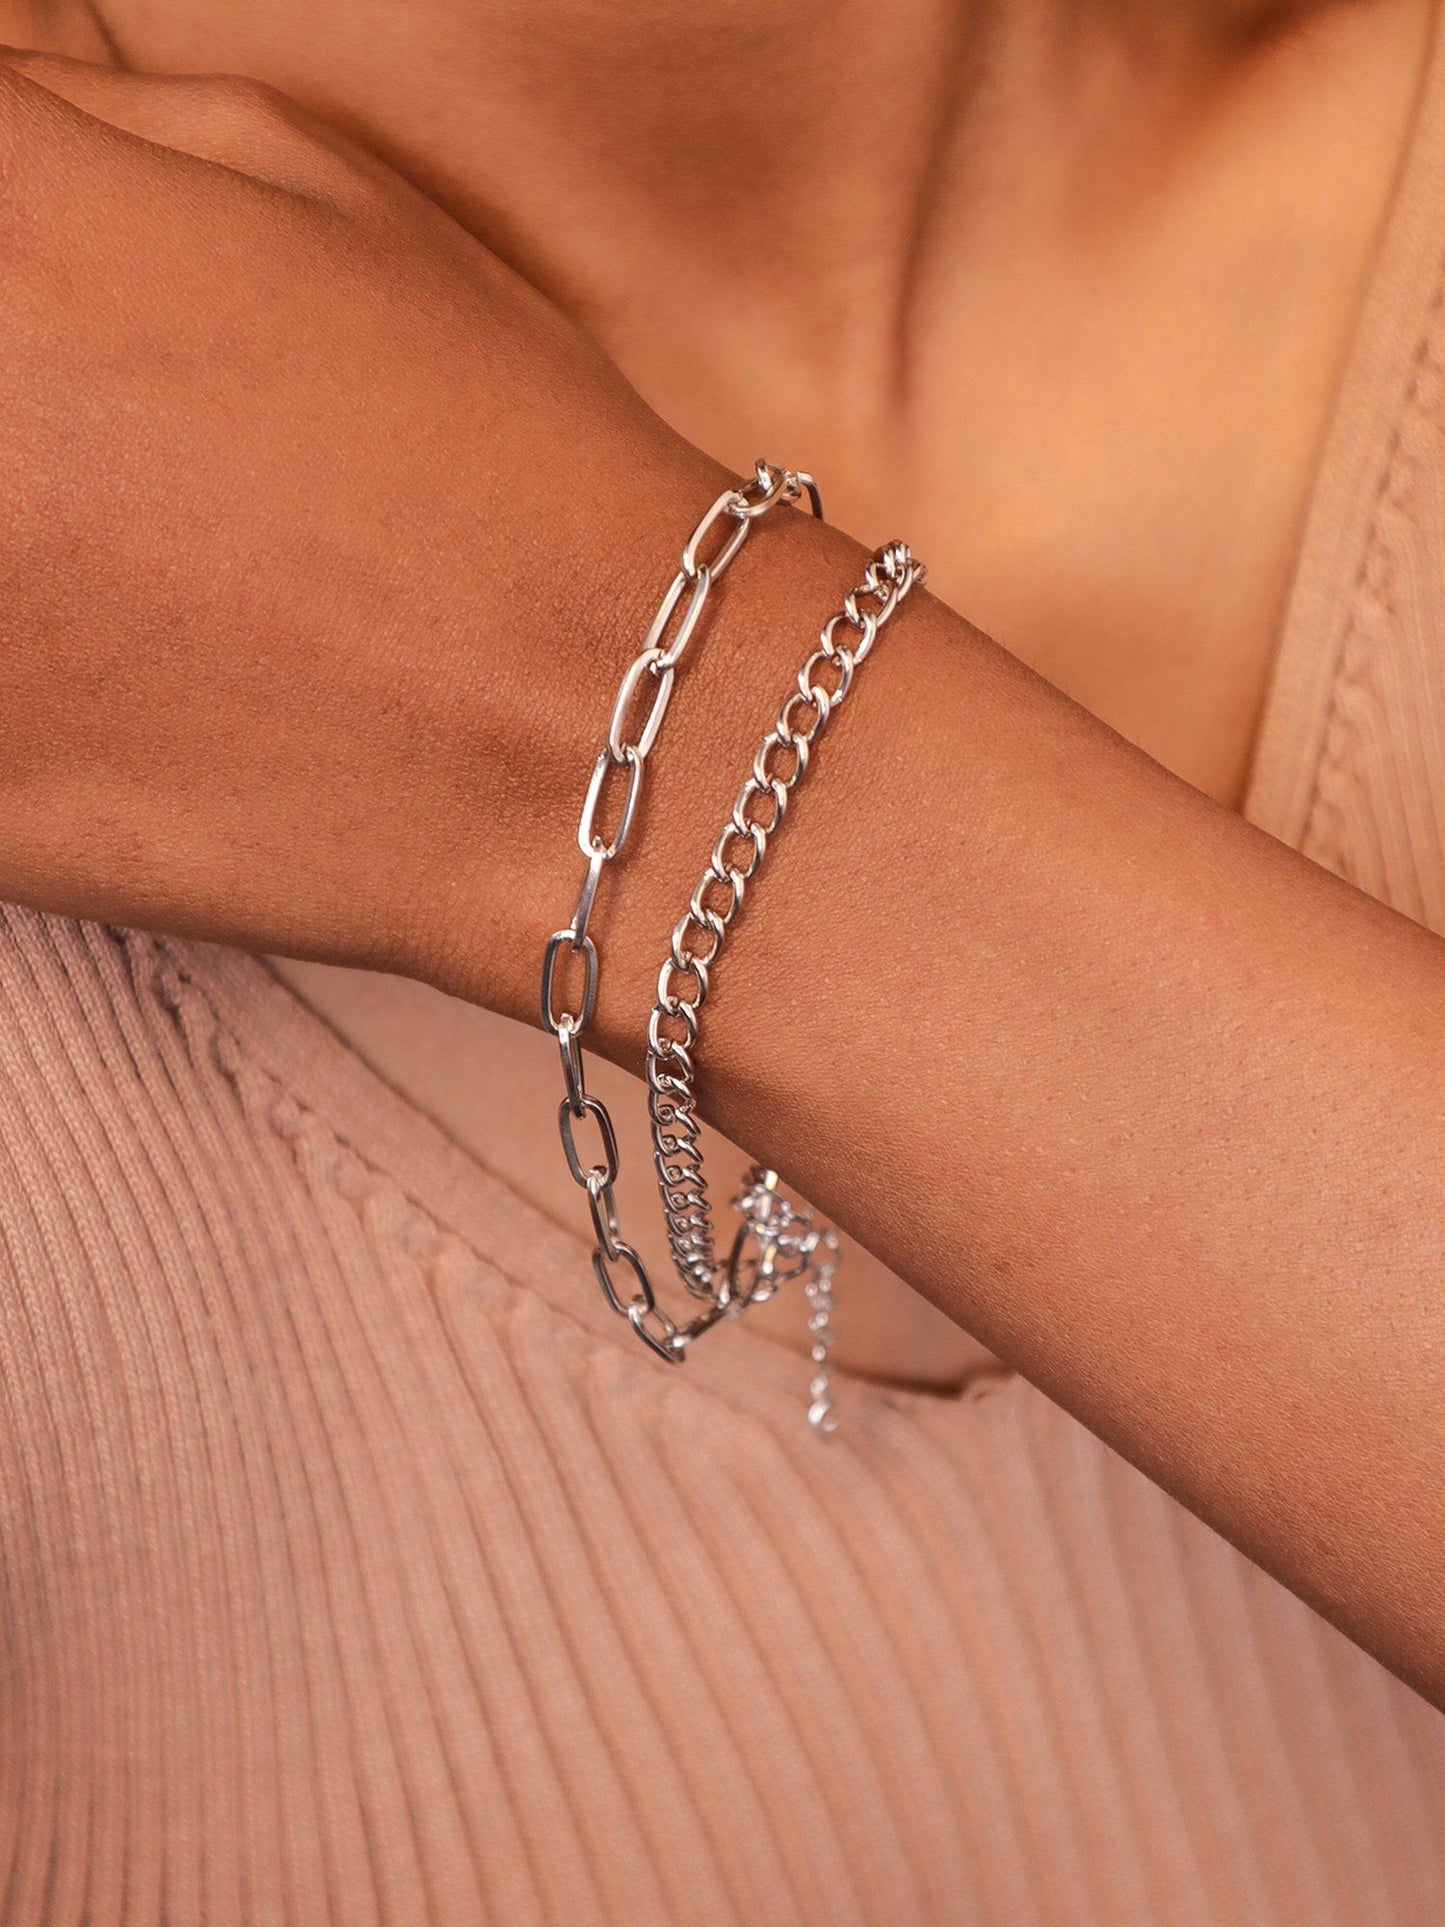 Minimal Silver Plated Link Chain Bracelet